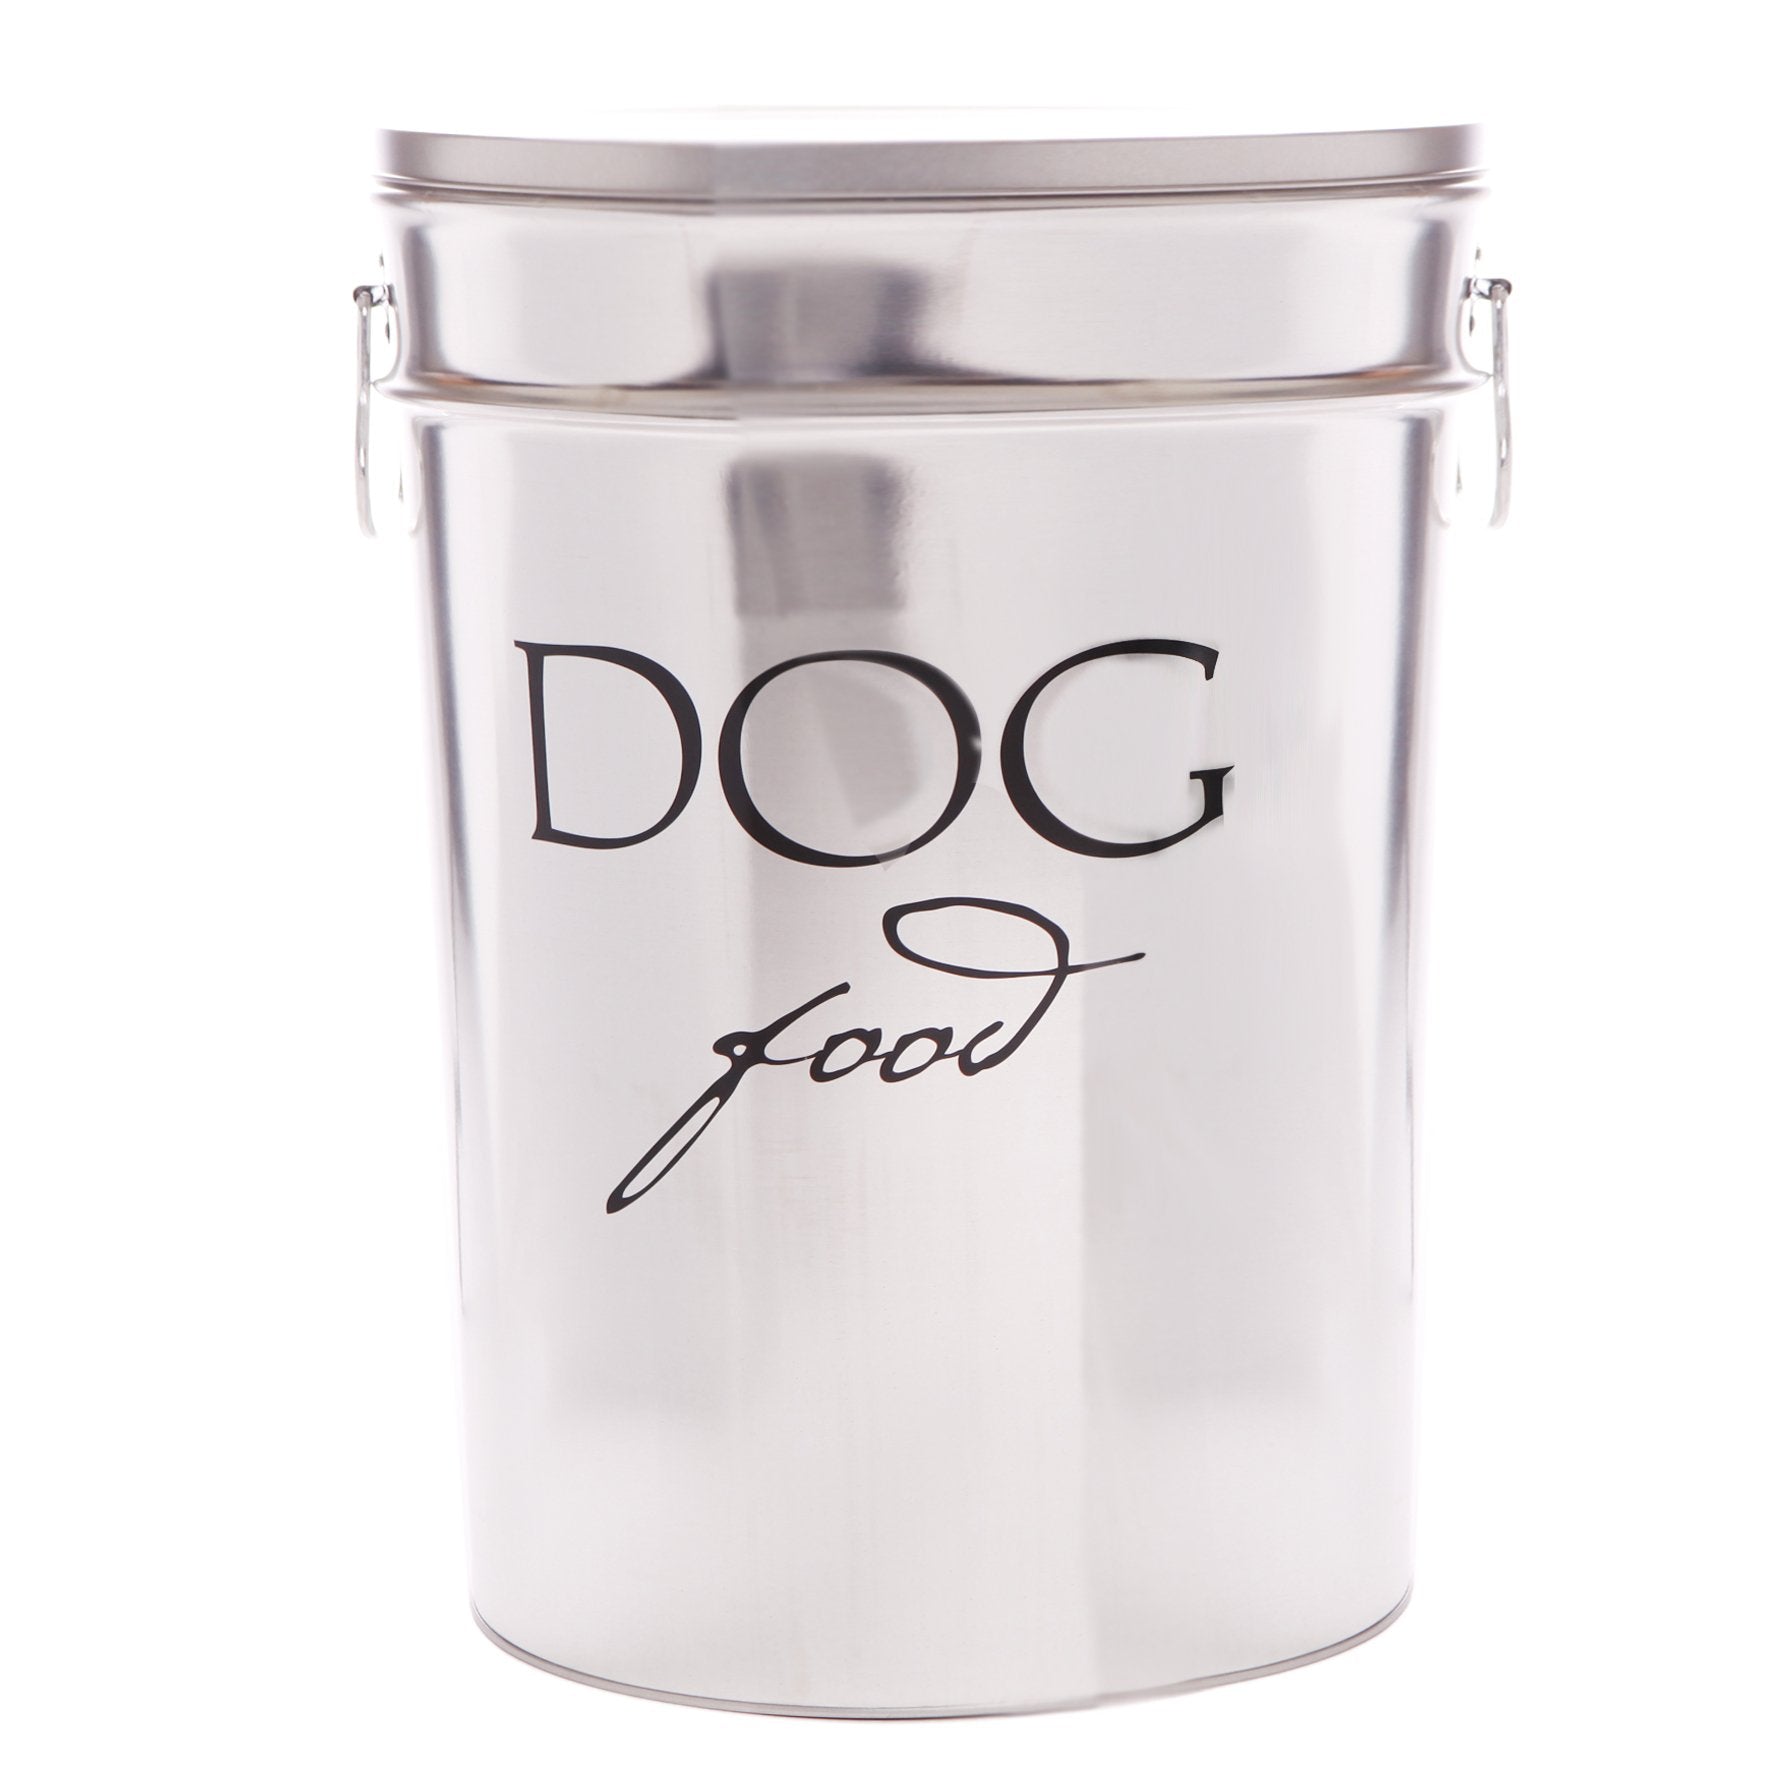 Harry Barker Classic Dog Food Storage Canister, White, Small